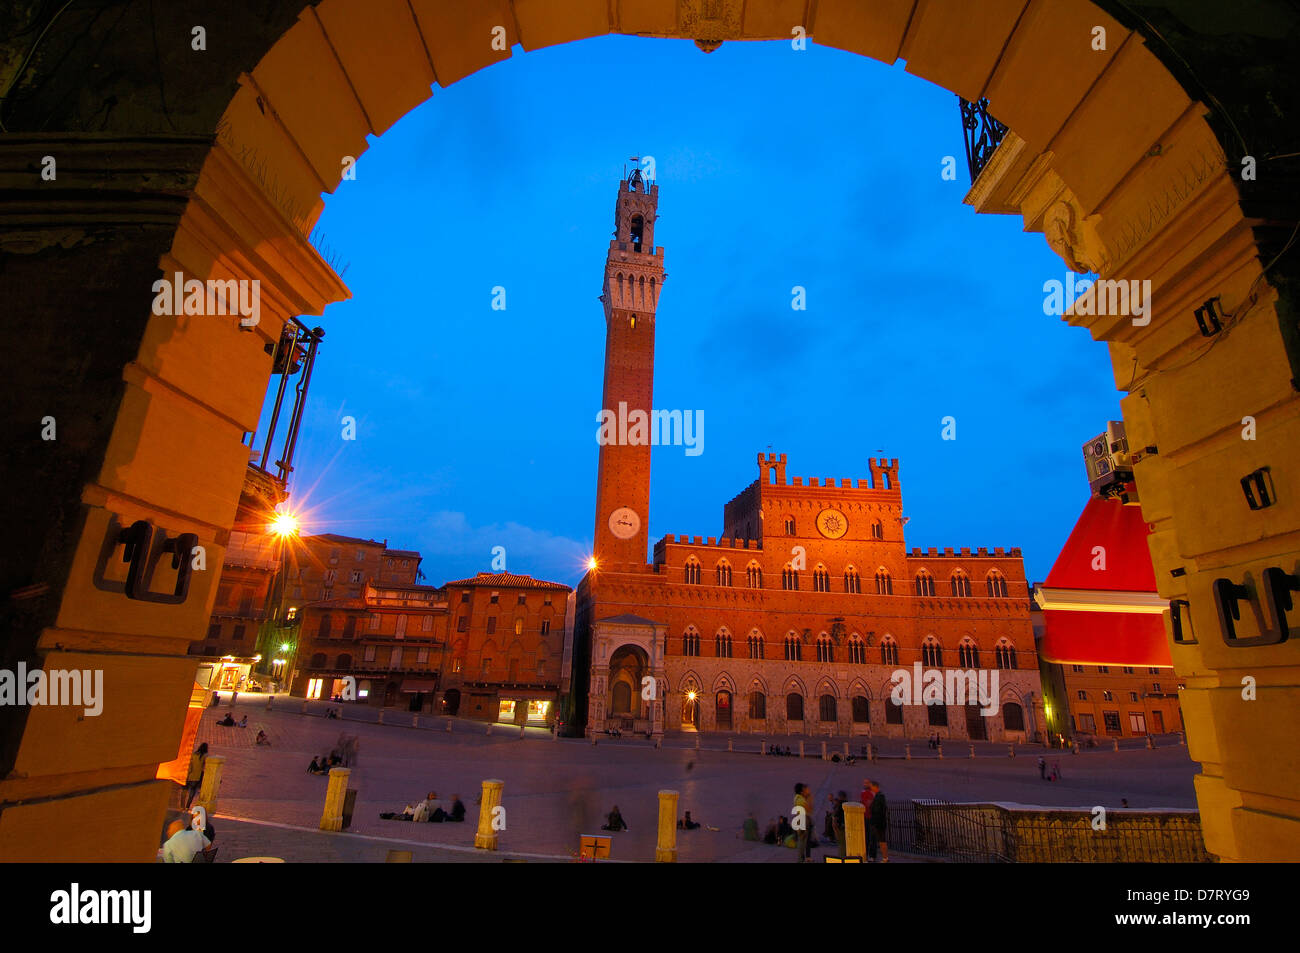 Siena, Piazza del campo and Torre del Mangia at Dusk, The Campo Square and Mangia Tower at Dusk,Tuscany, Italy, Stock Photo